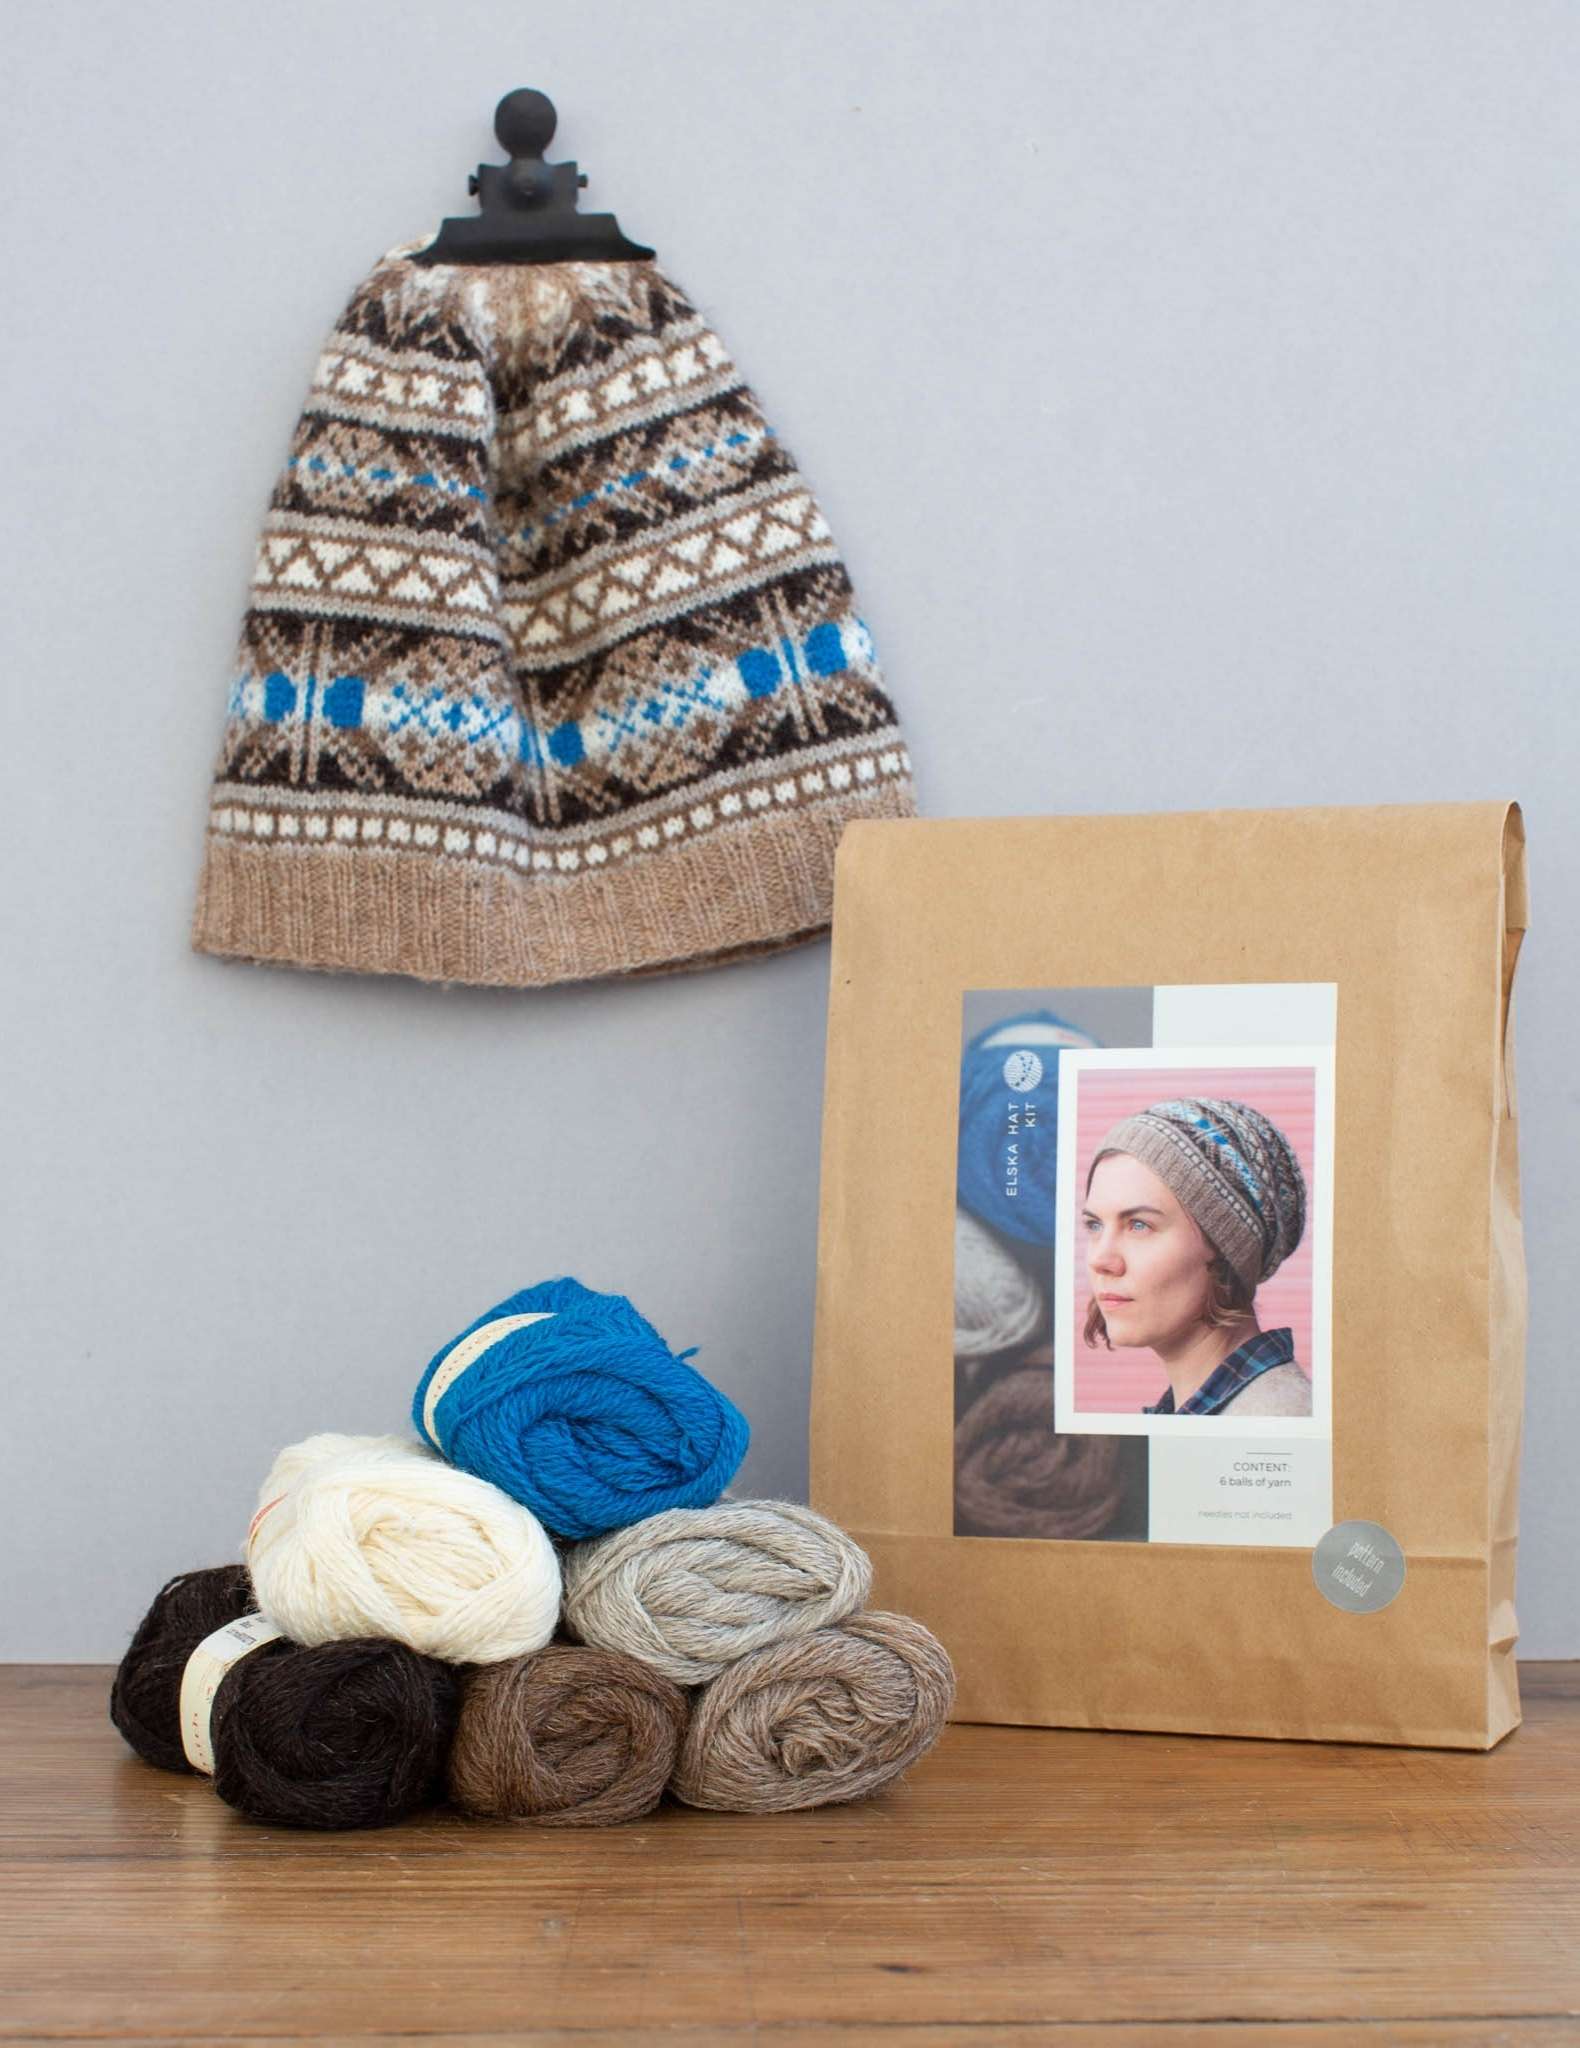 A hat knitting kit in a paper bag, with the hat hanging from the wall behind by a clip and 6 balls of yarn piled in front in blues and neutral colours.